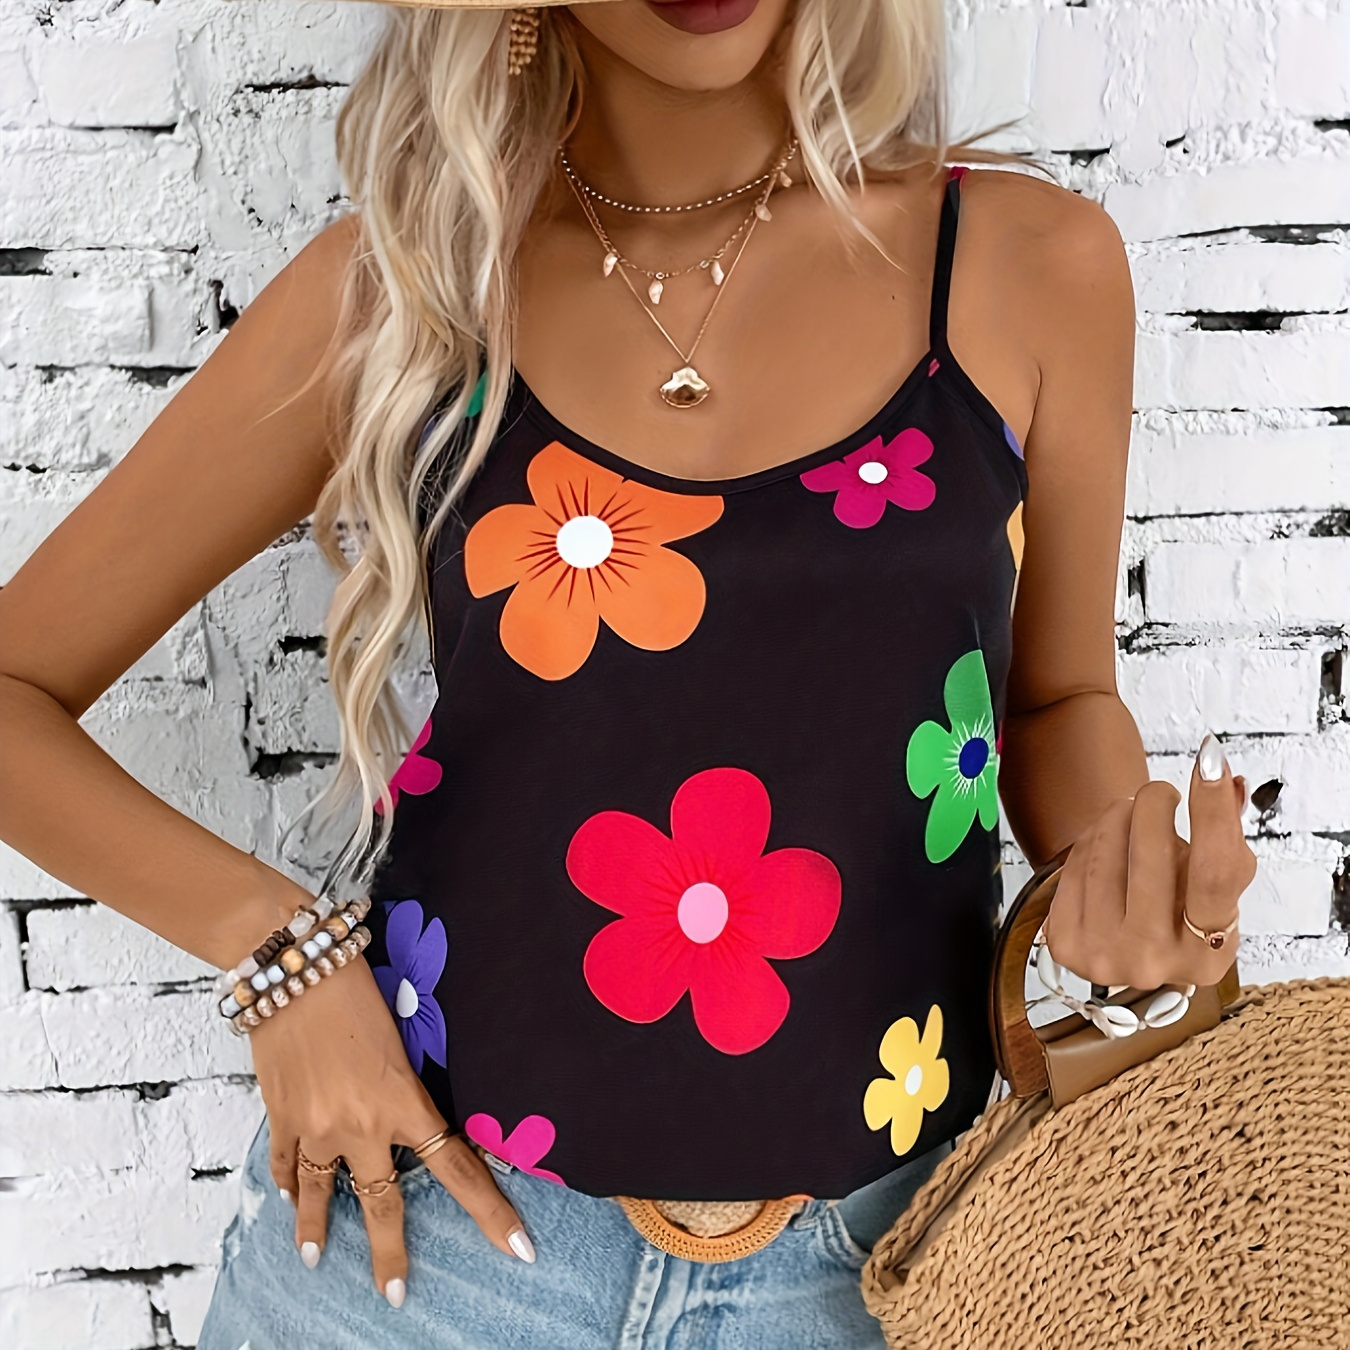 

Floral Print Spaghetti Strap Top, Elegant Sleeveless Cami Top For Spring & Summer, Women's Clothing